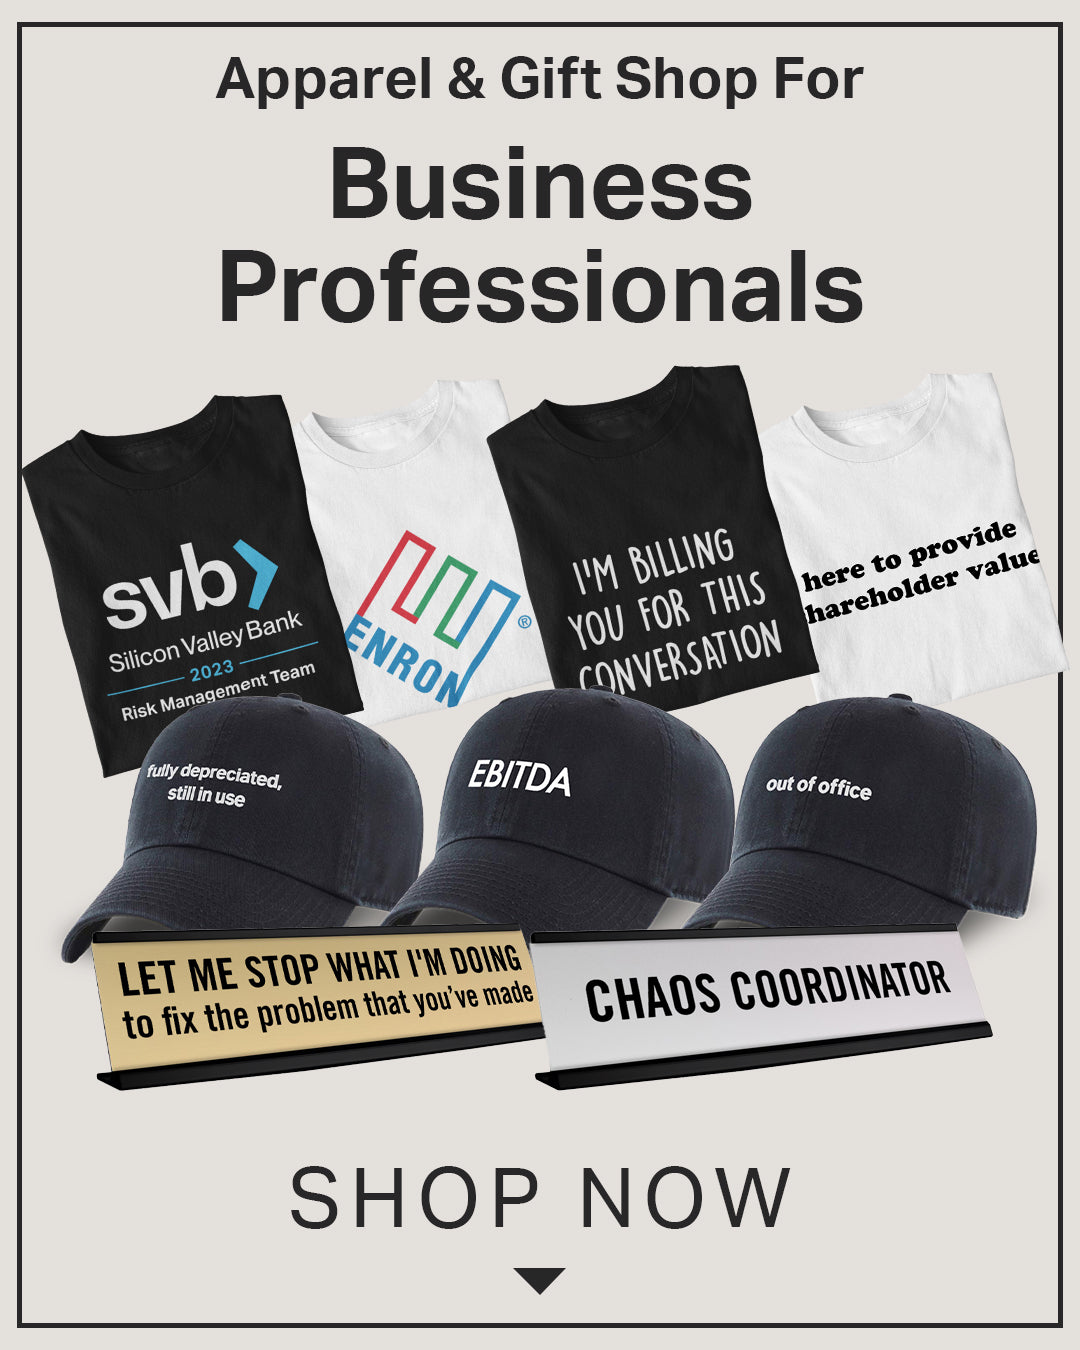 Apparel & Gifts For Business Professionals